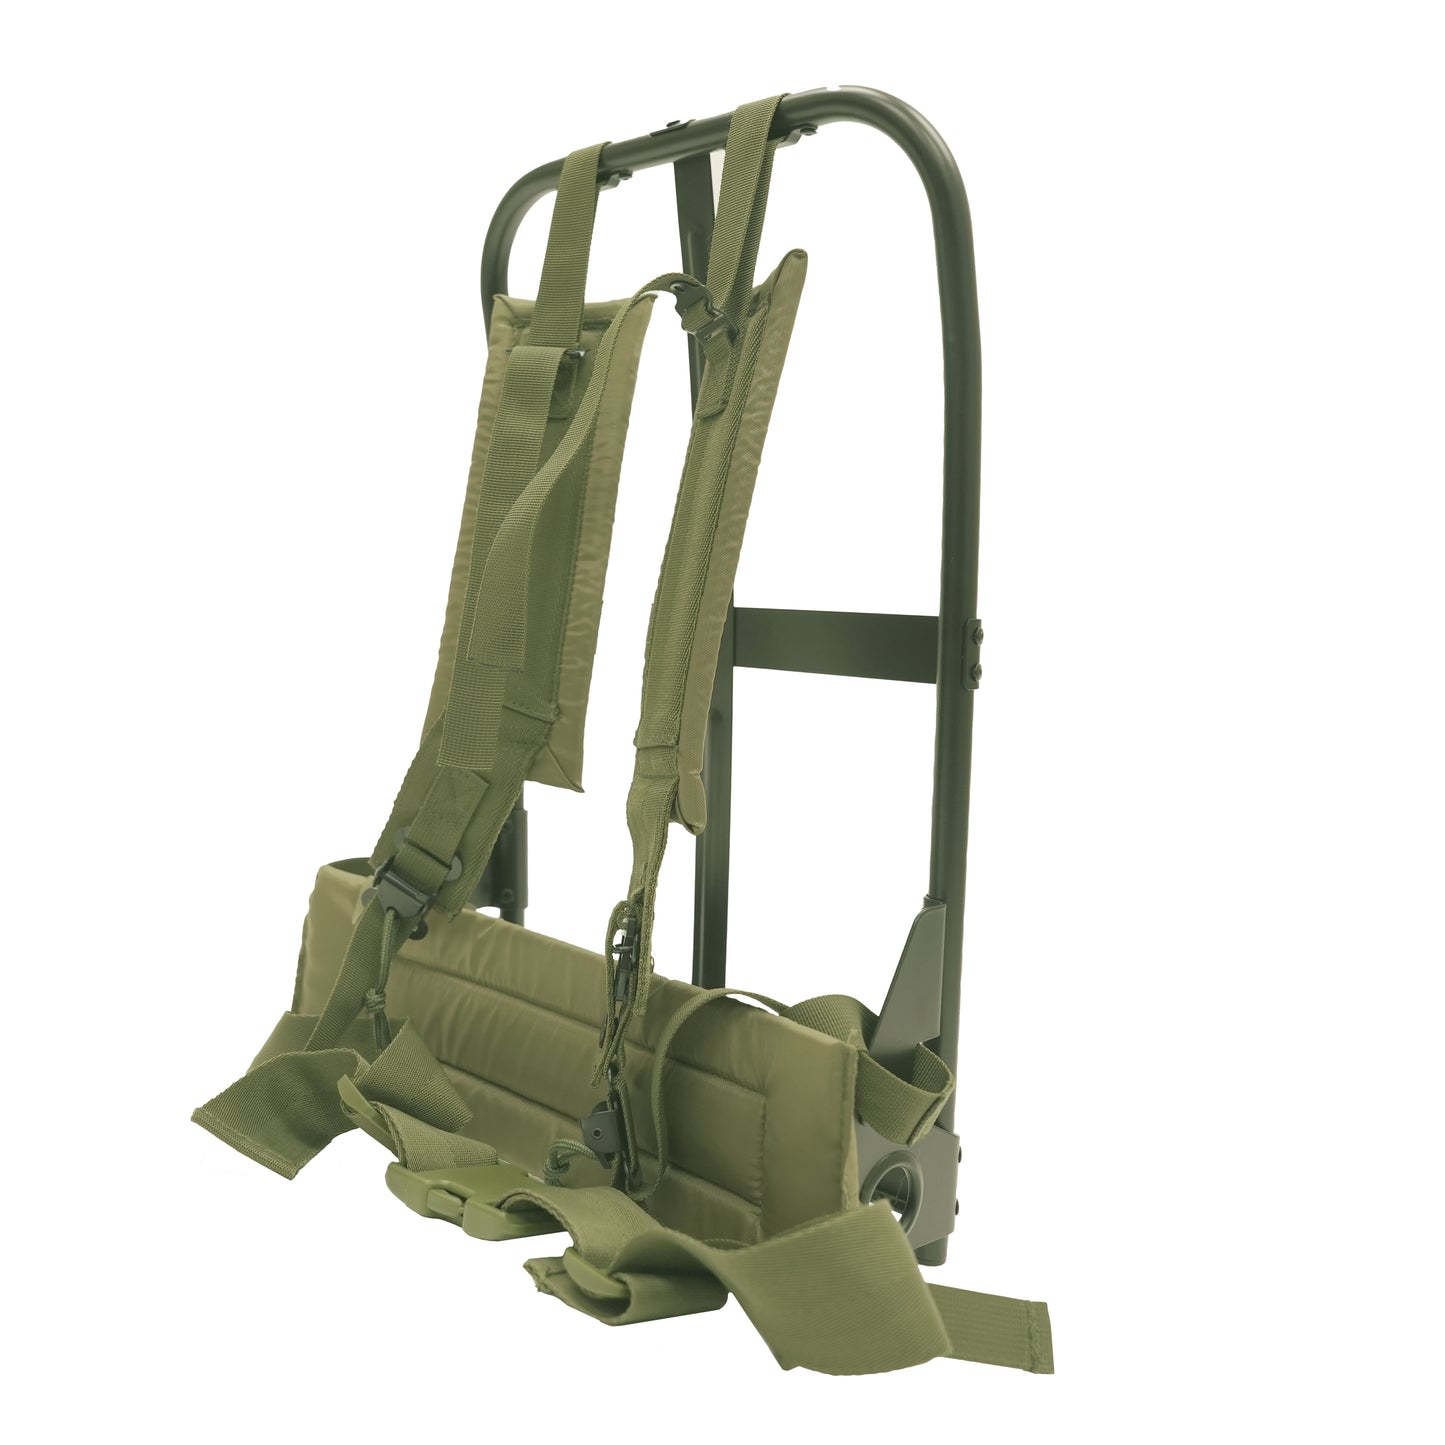 ALICE Pack Aluminum Frame With Attachments - 20" Rothco GI LC-1 Frames